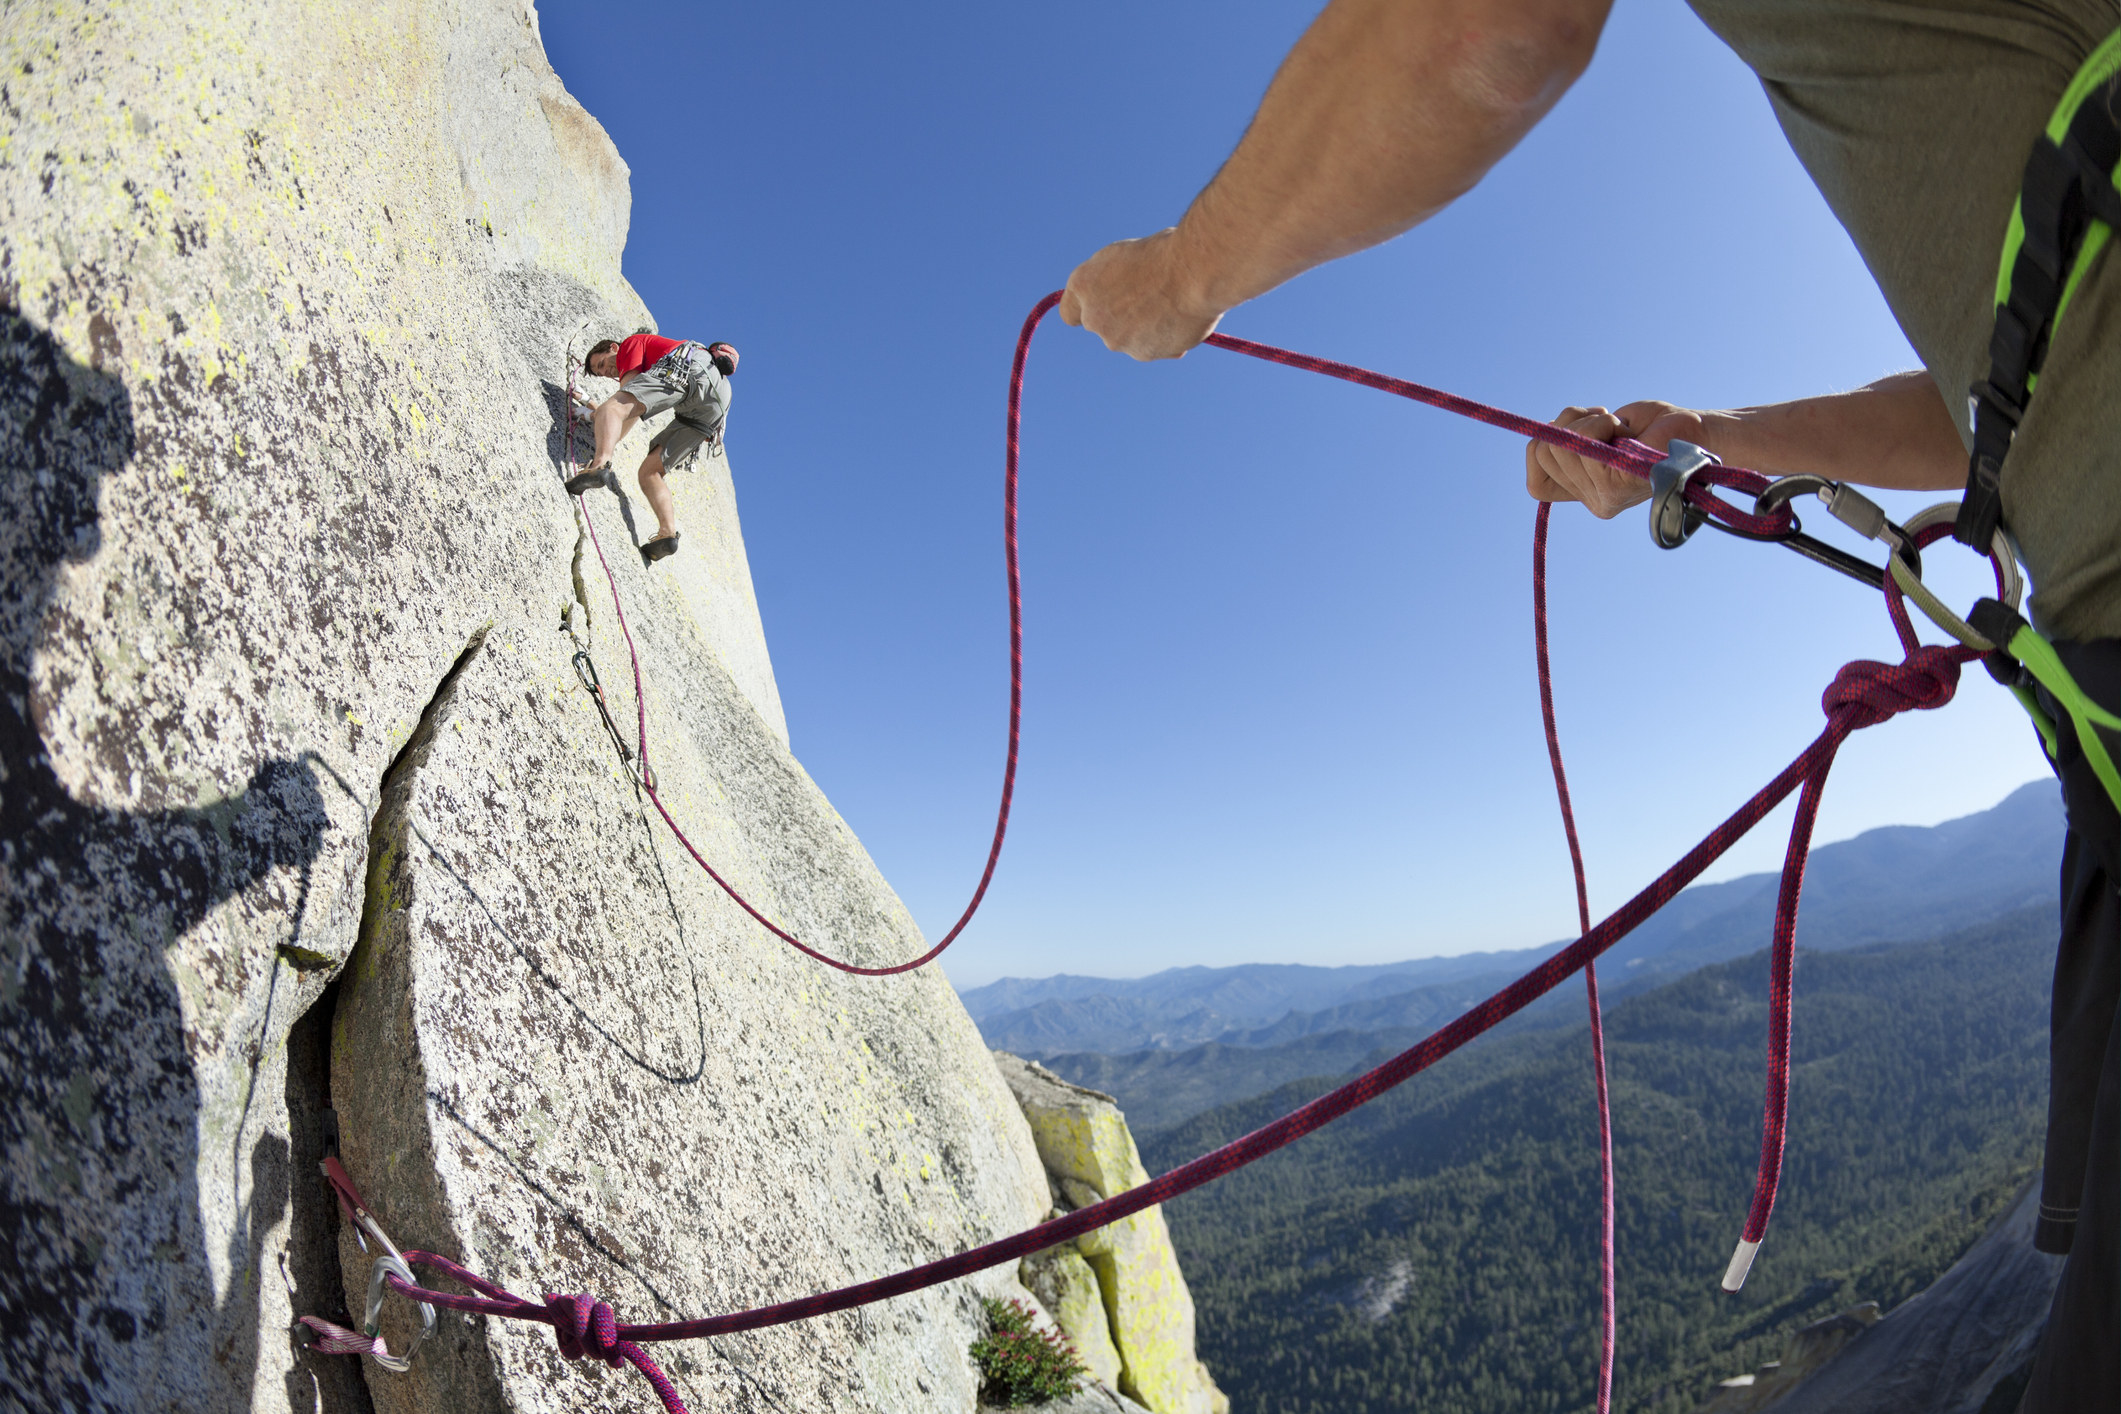 someone holding ropes on the ground while some rock climbs